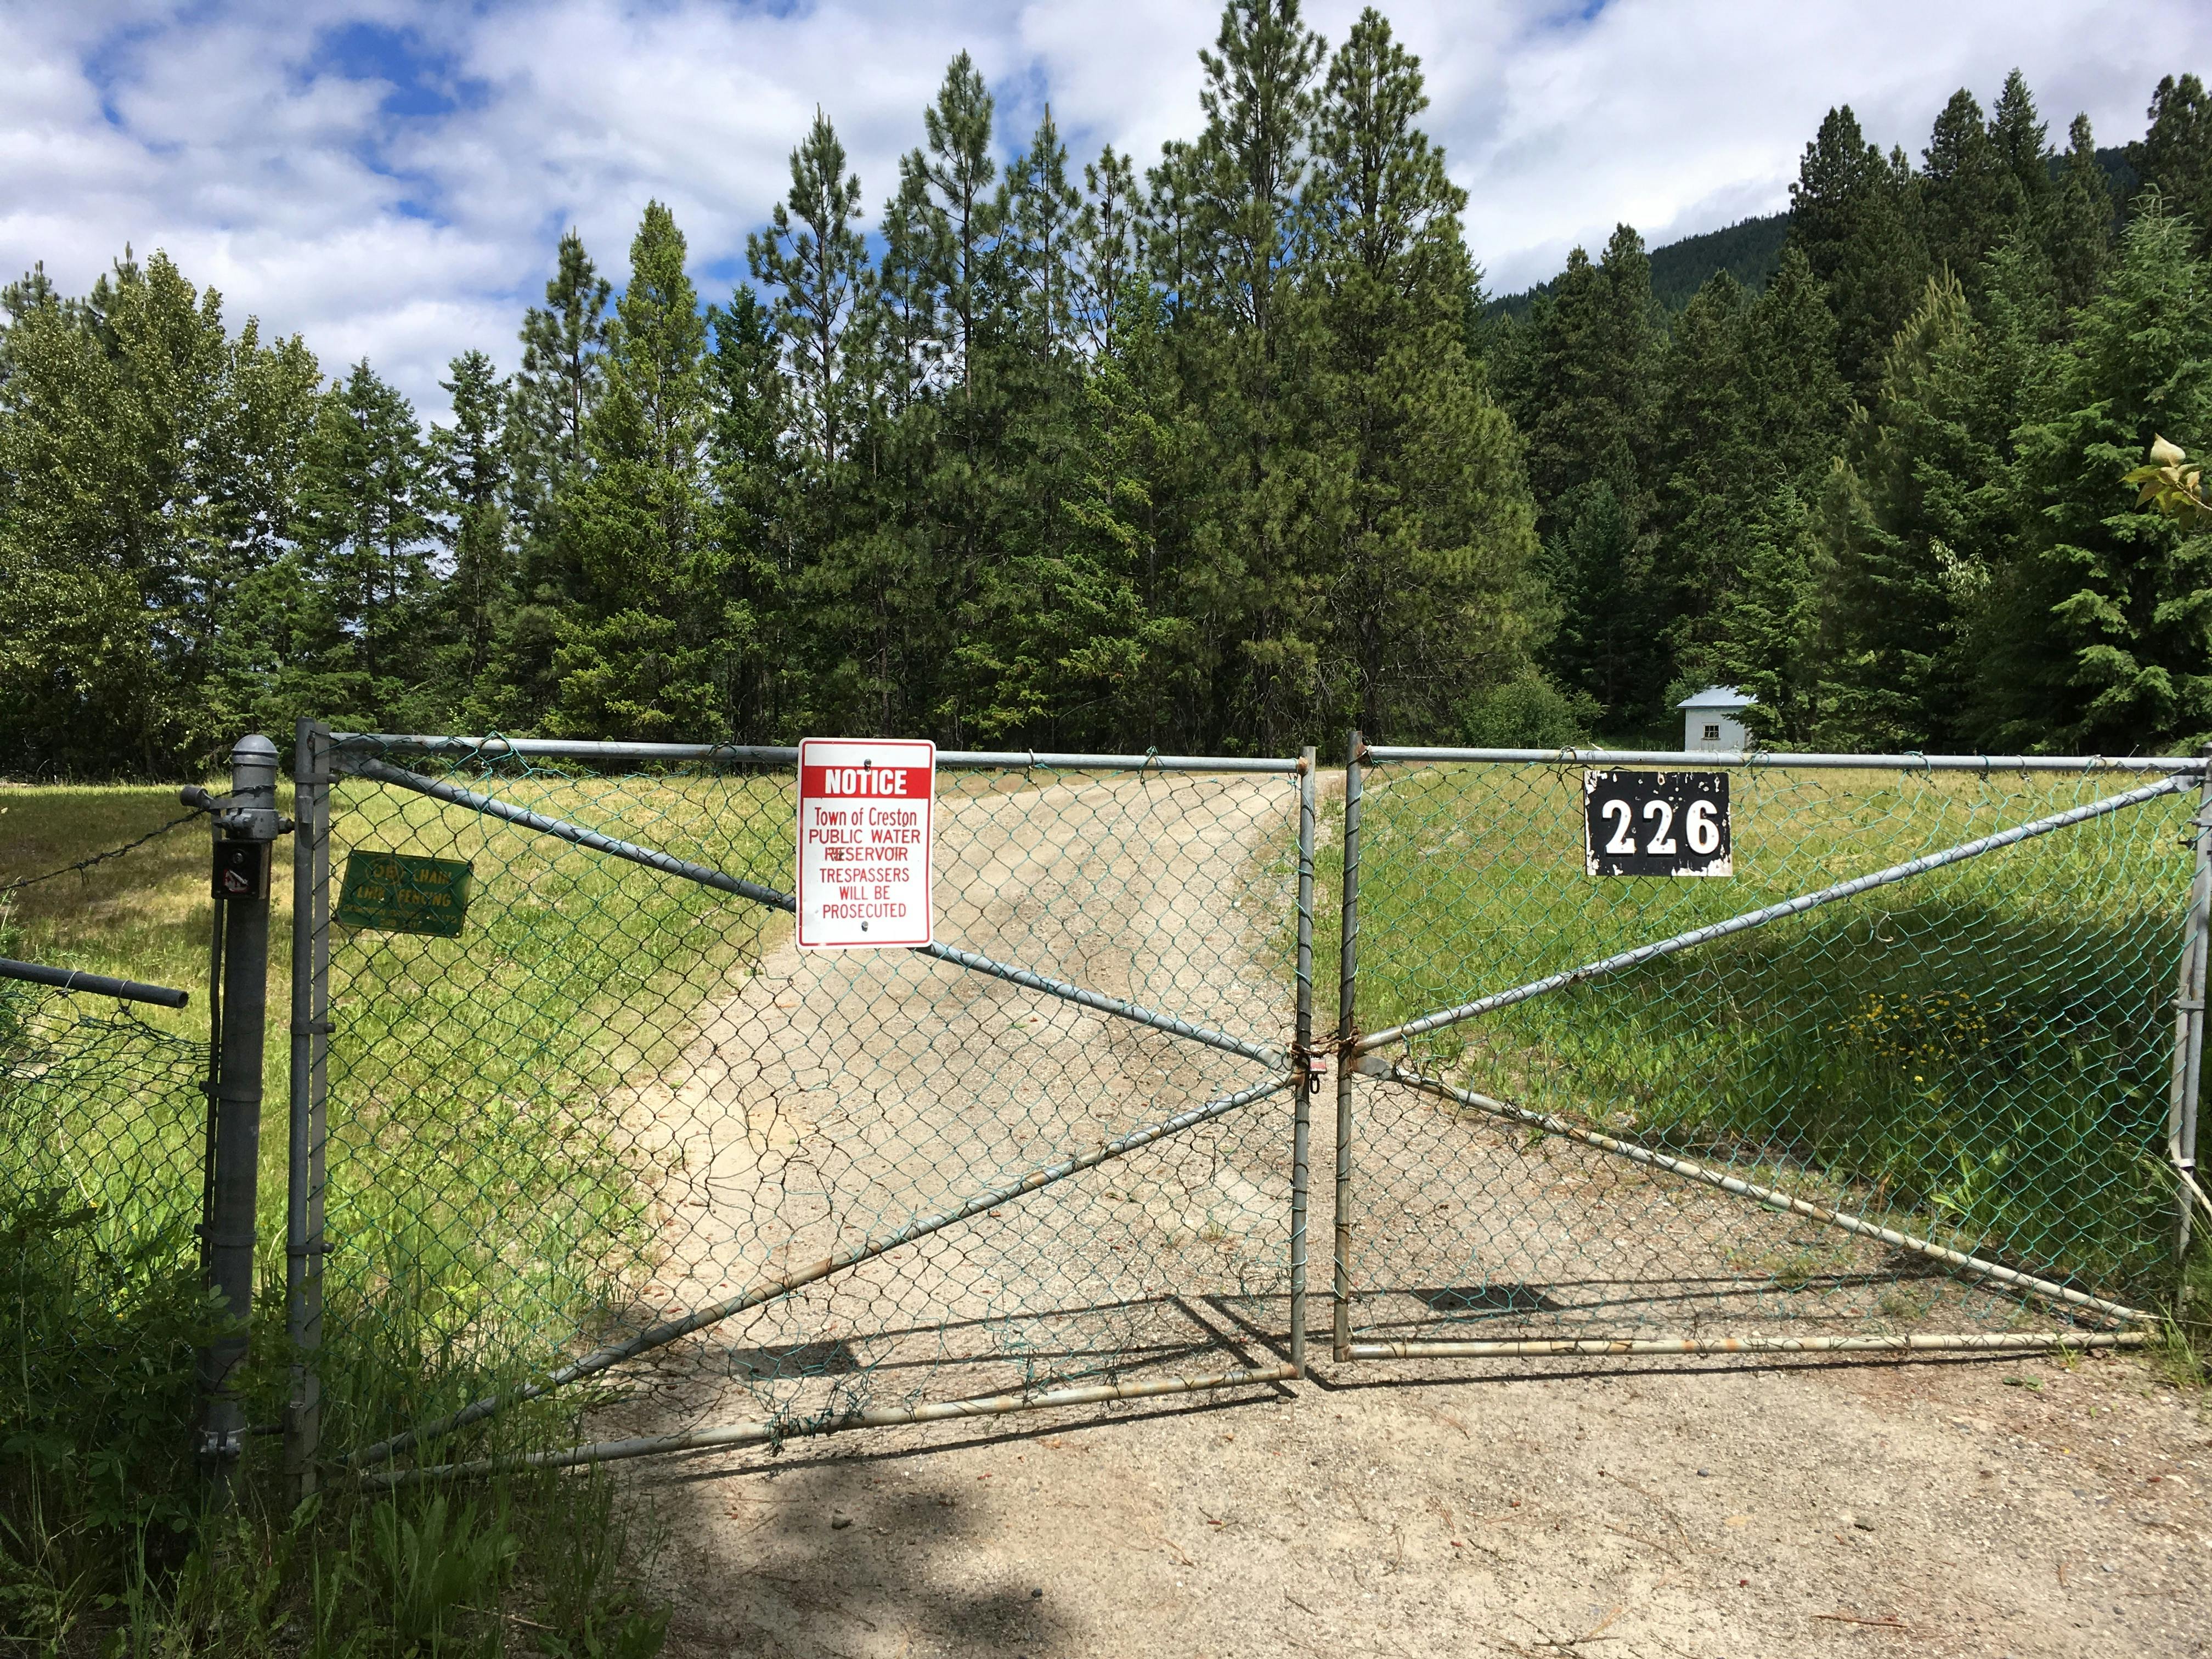 2020 Photo of gate preventing public access to site